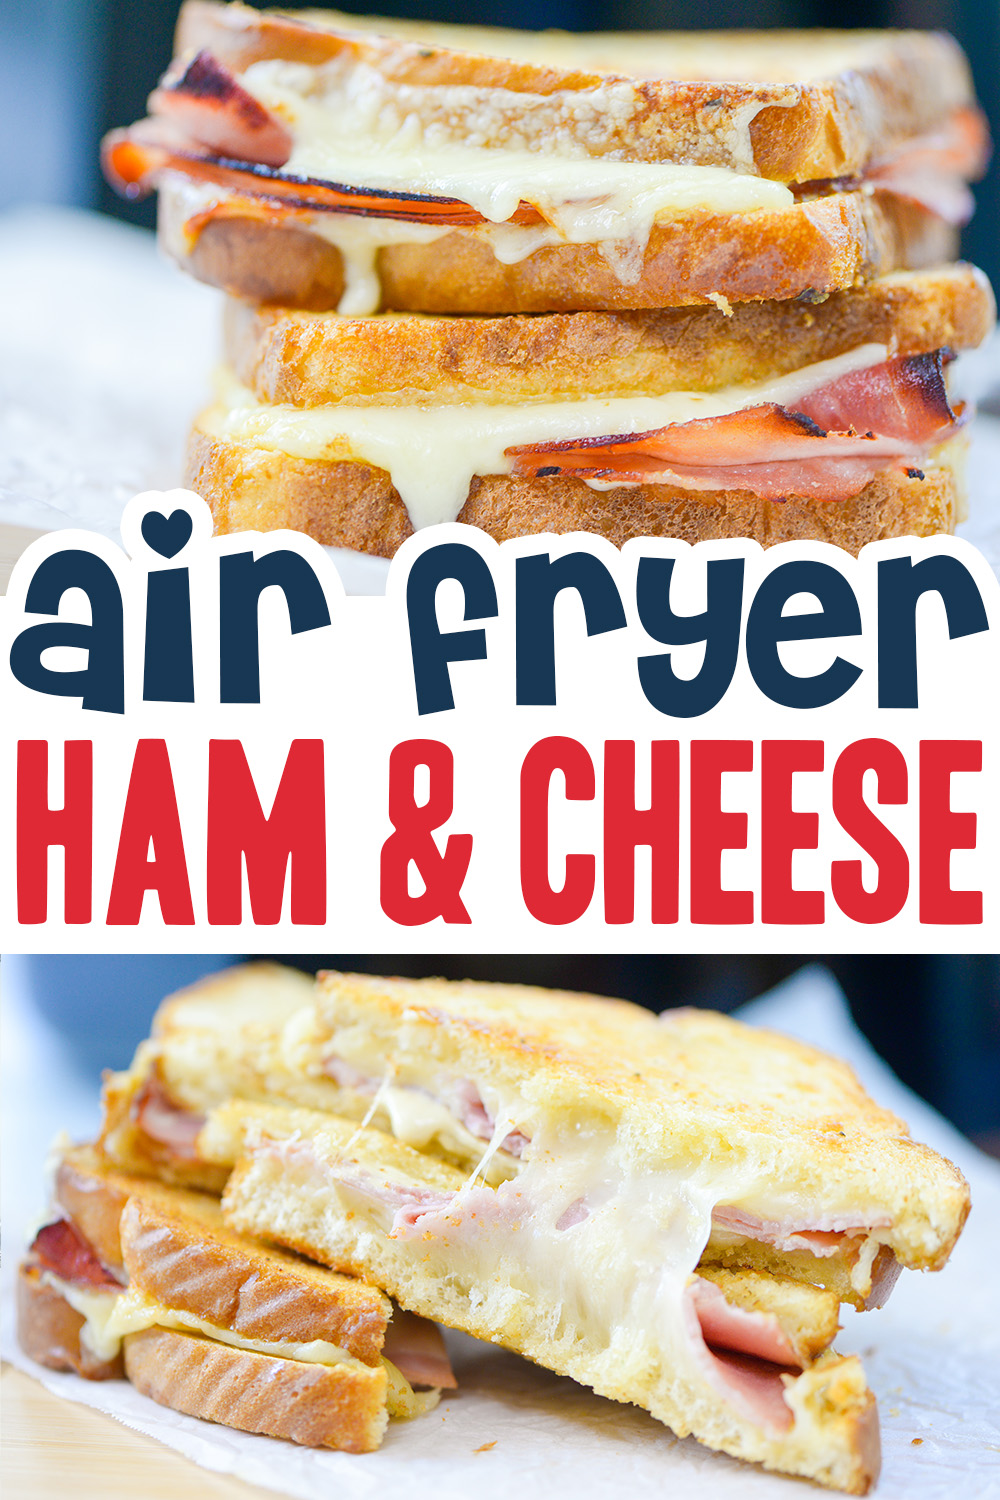 This Air Fryer Hot Ham and Cheese Sandwich is crispy and buttery on the outside and loaded with melty cheese, deli ham, and a creamy sauce on the inside! This sandwich makes the perfect lunch.